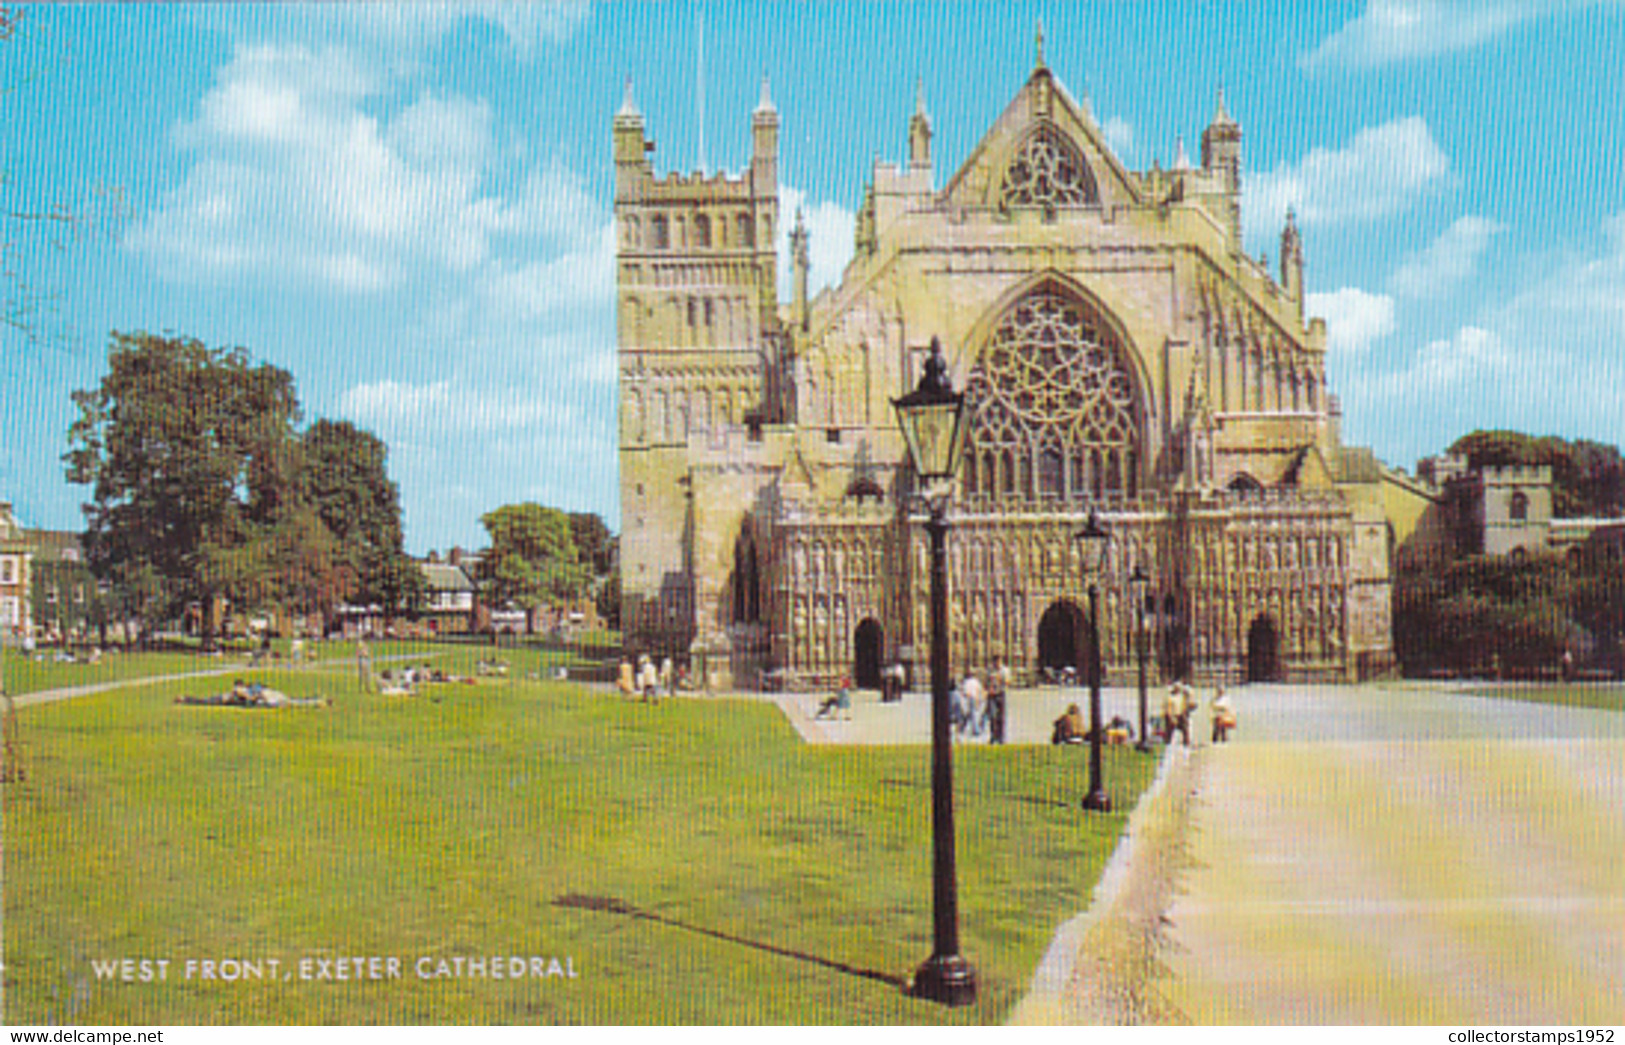 EXETER CATHEDRAL, WEST FRONT, PEOPLE - Exeter